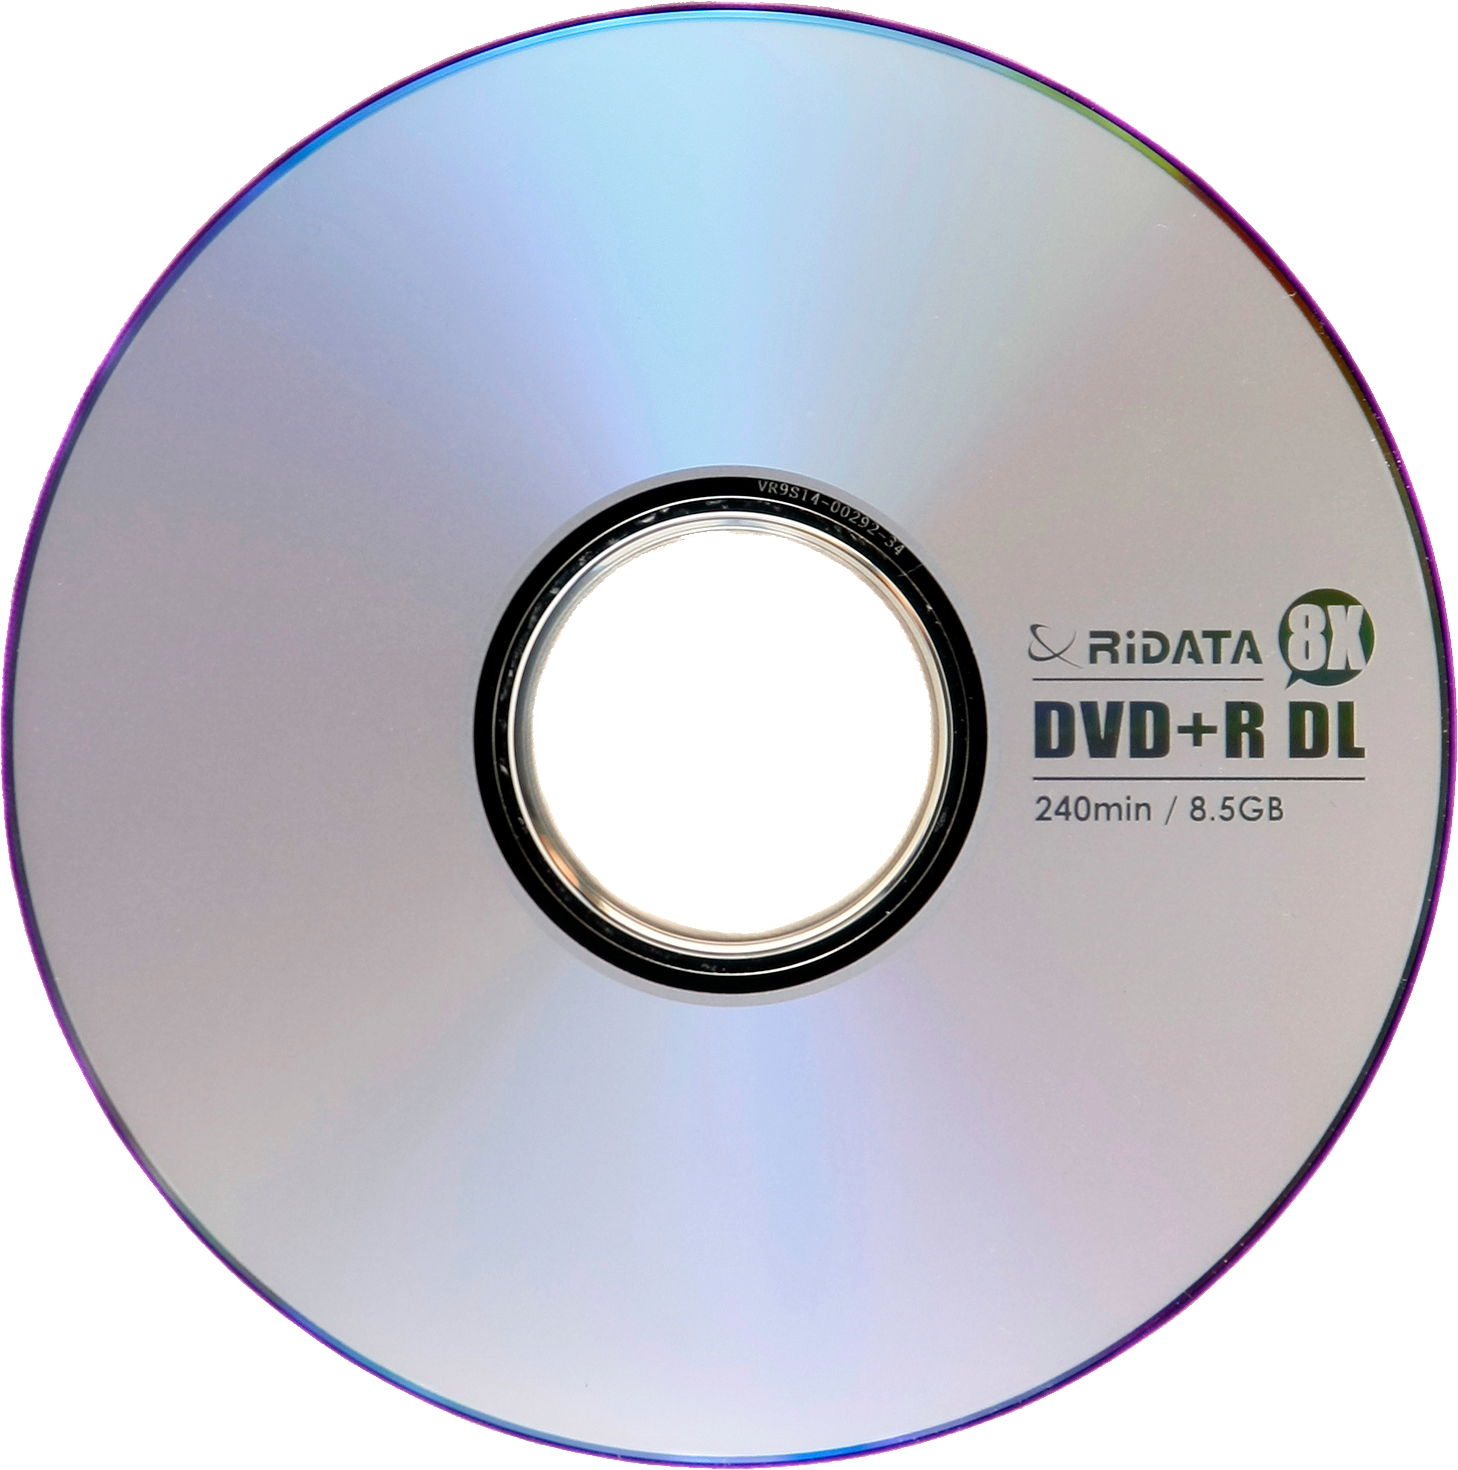 Download Cd Dvd Png Image For Free